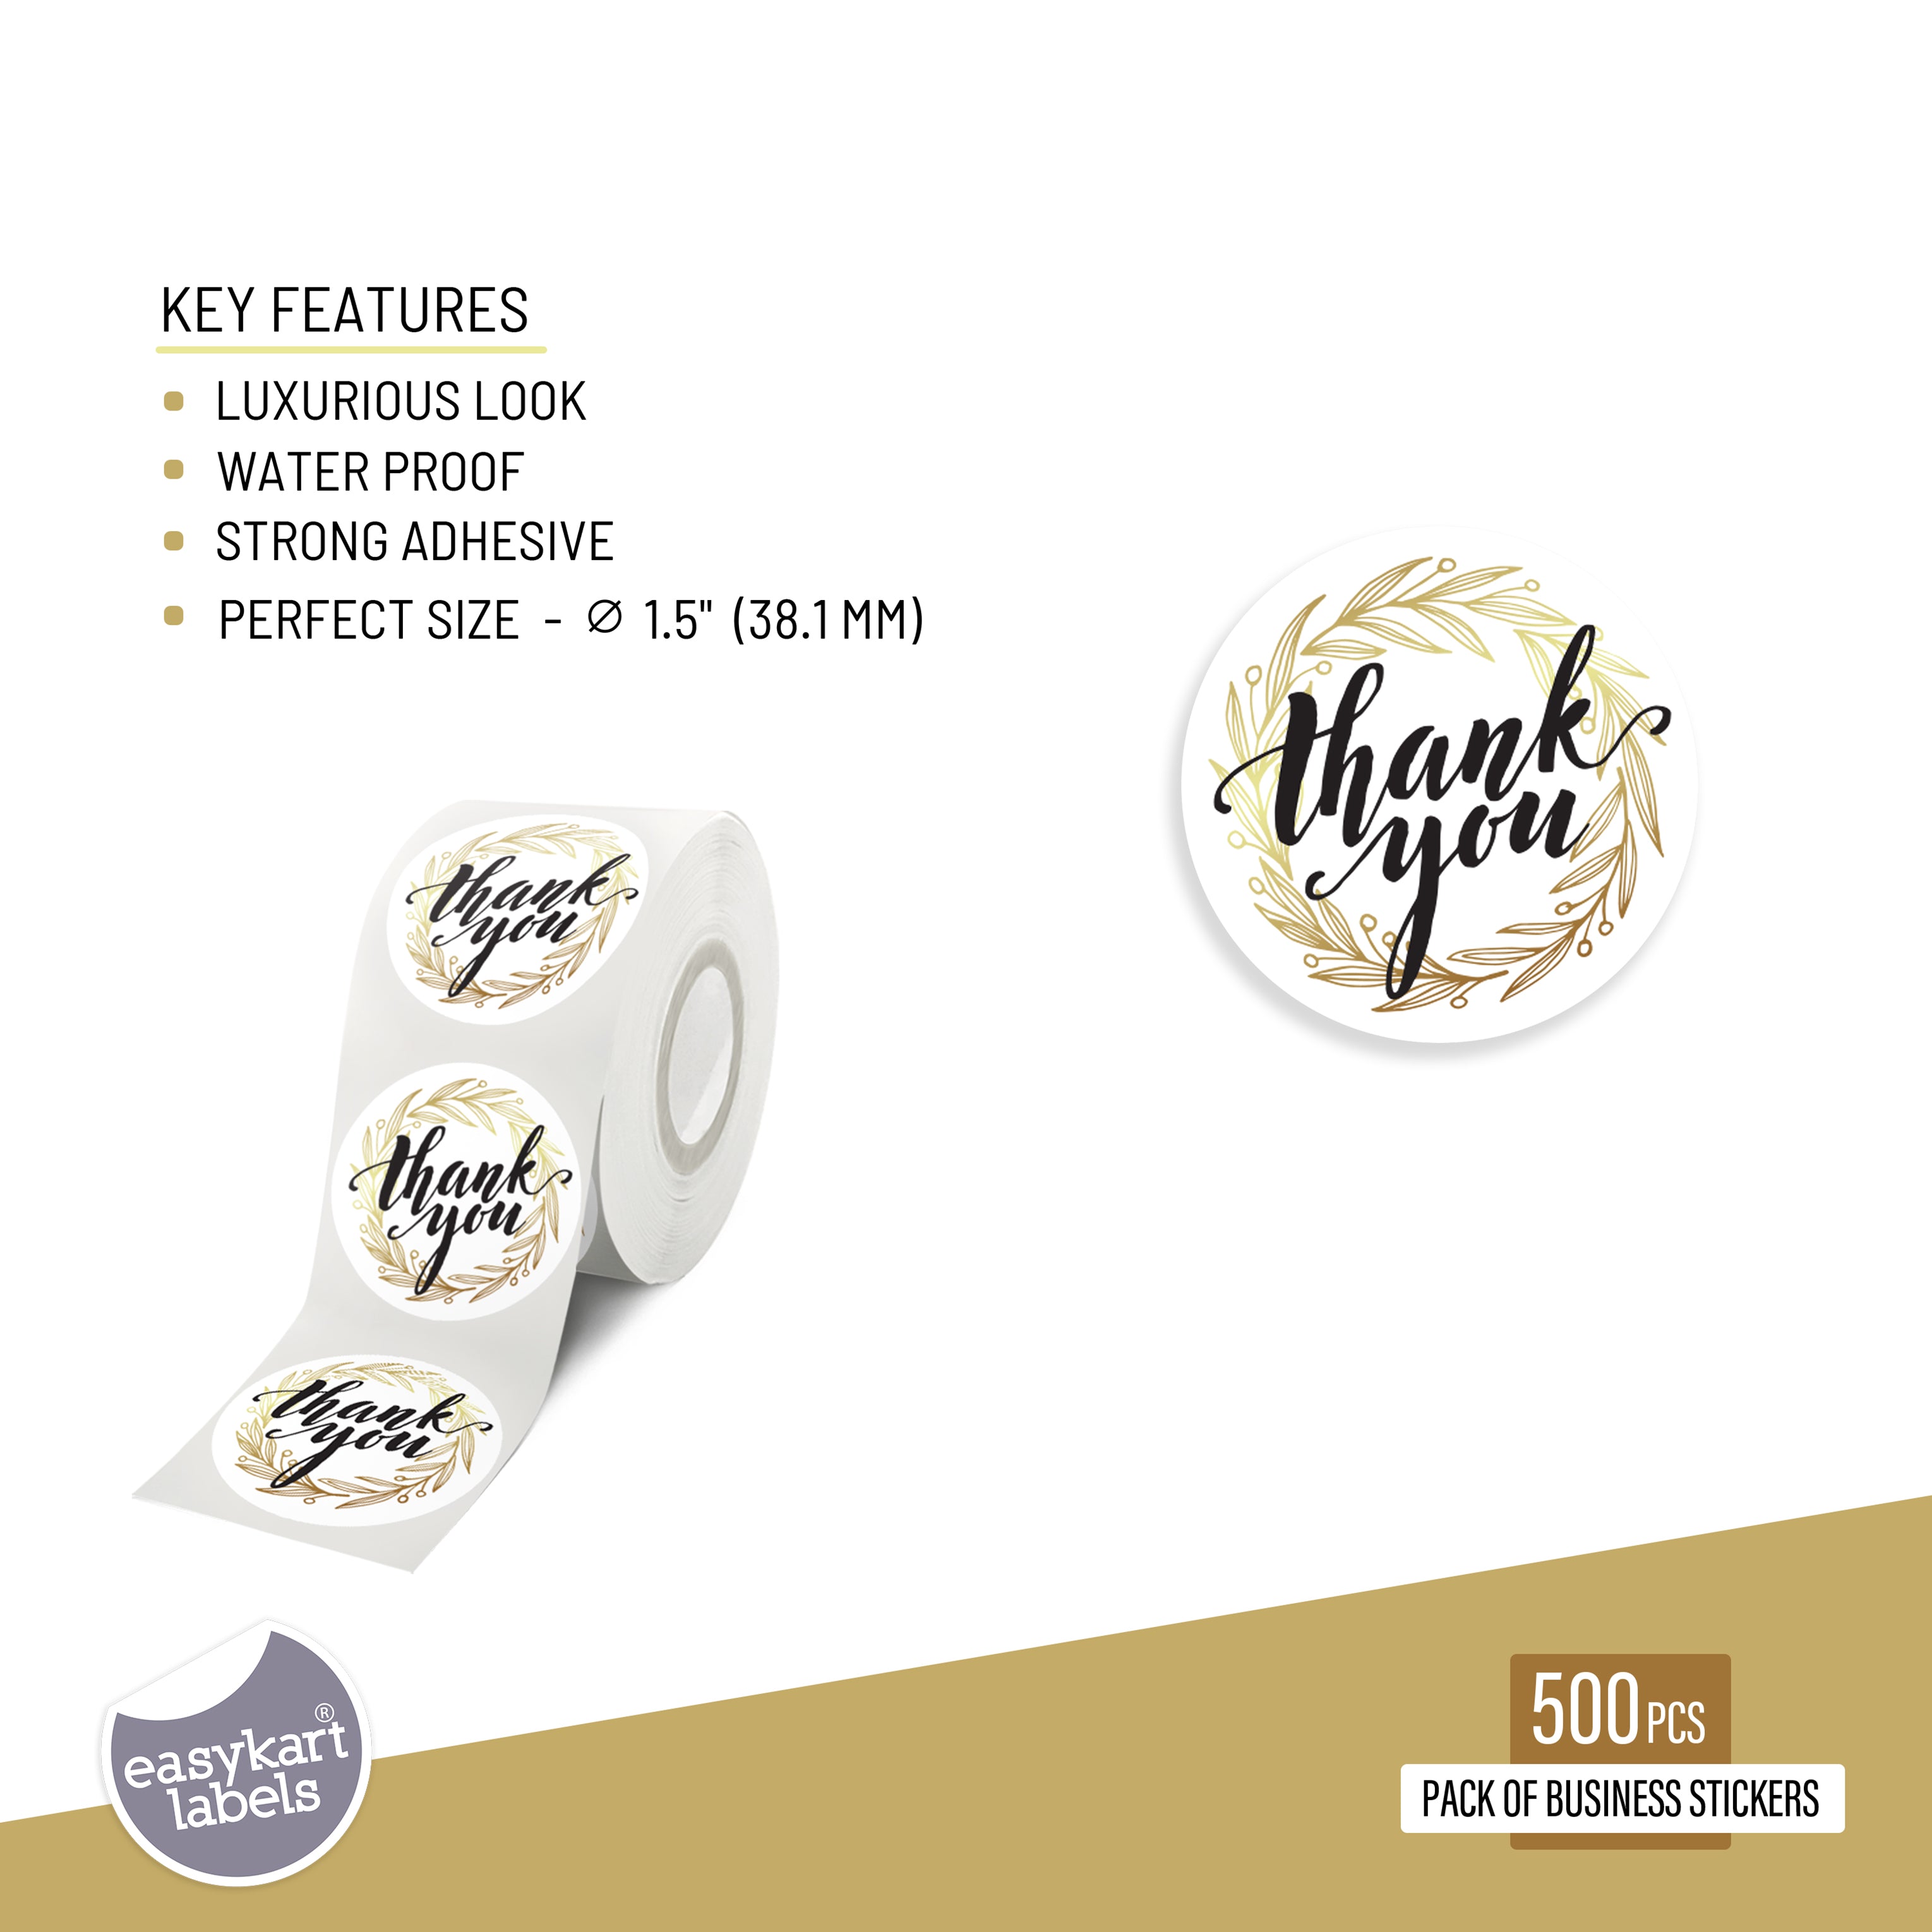 Gold Foil Round Circle Stickers - 1.5